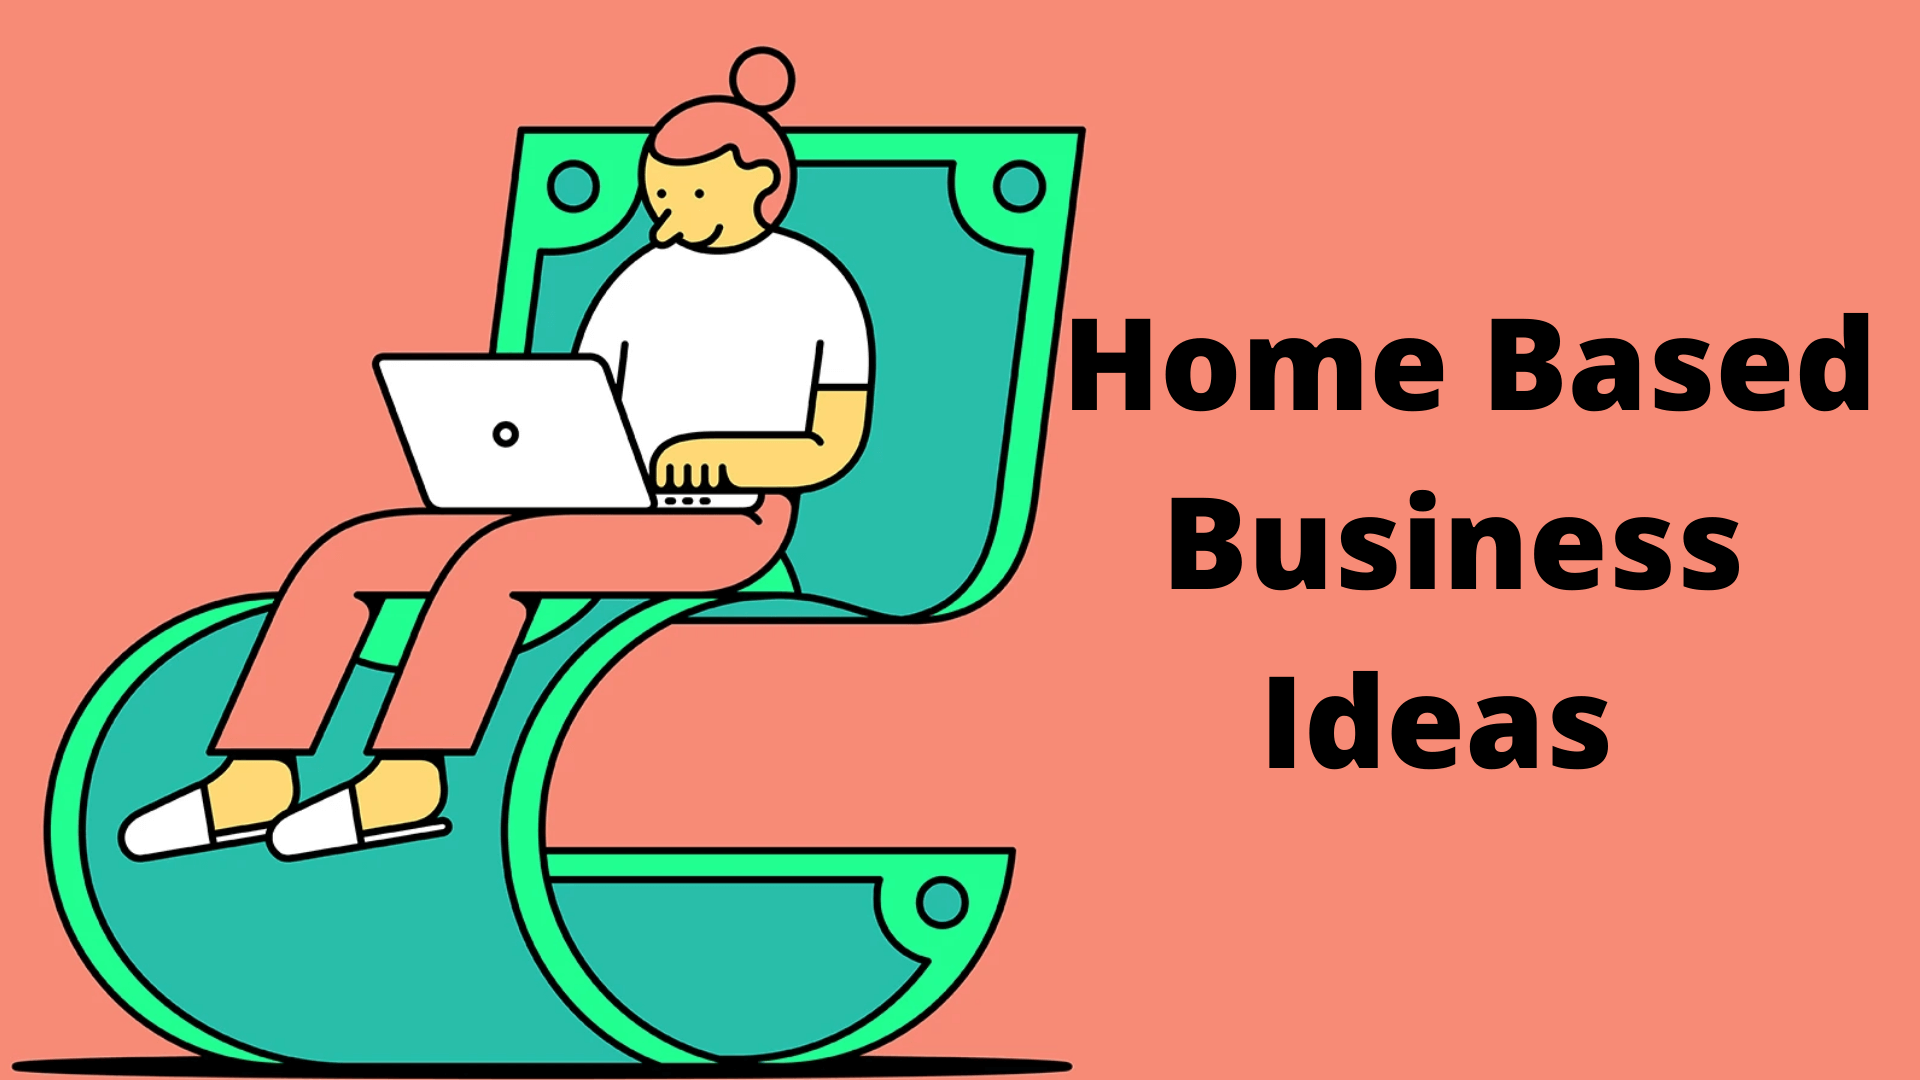 13 Home Based Business Ideas That Let You Work From Home! (2) (1)